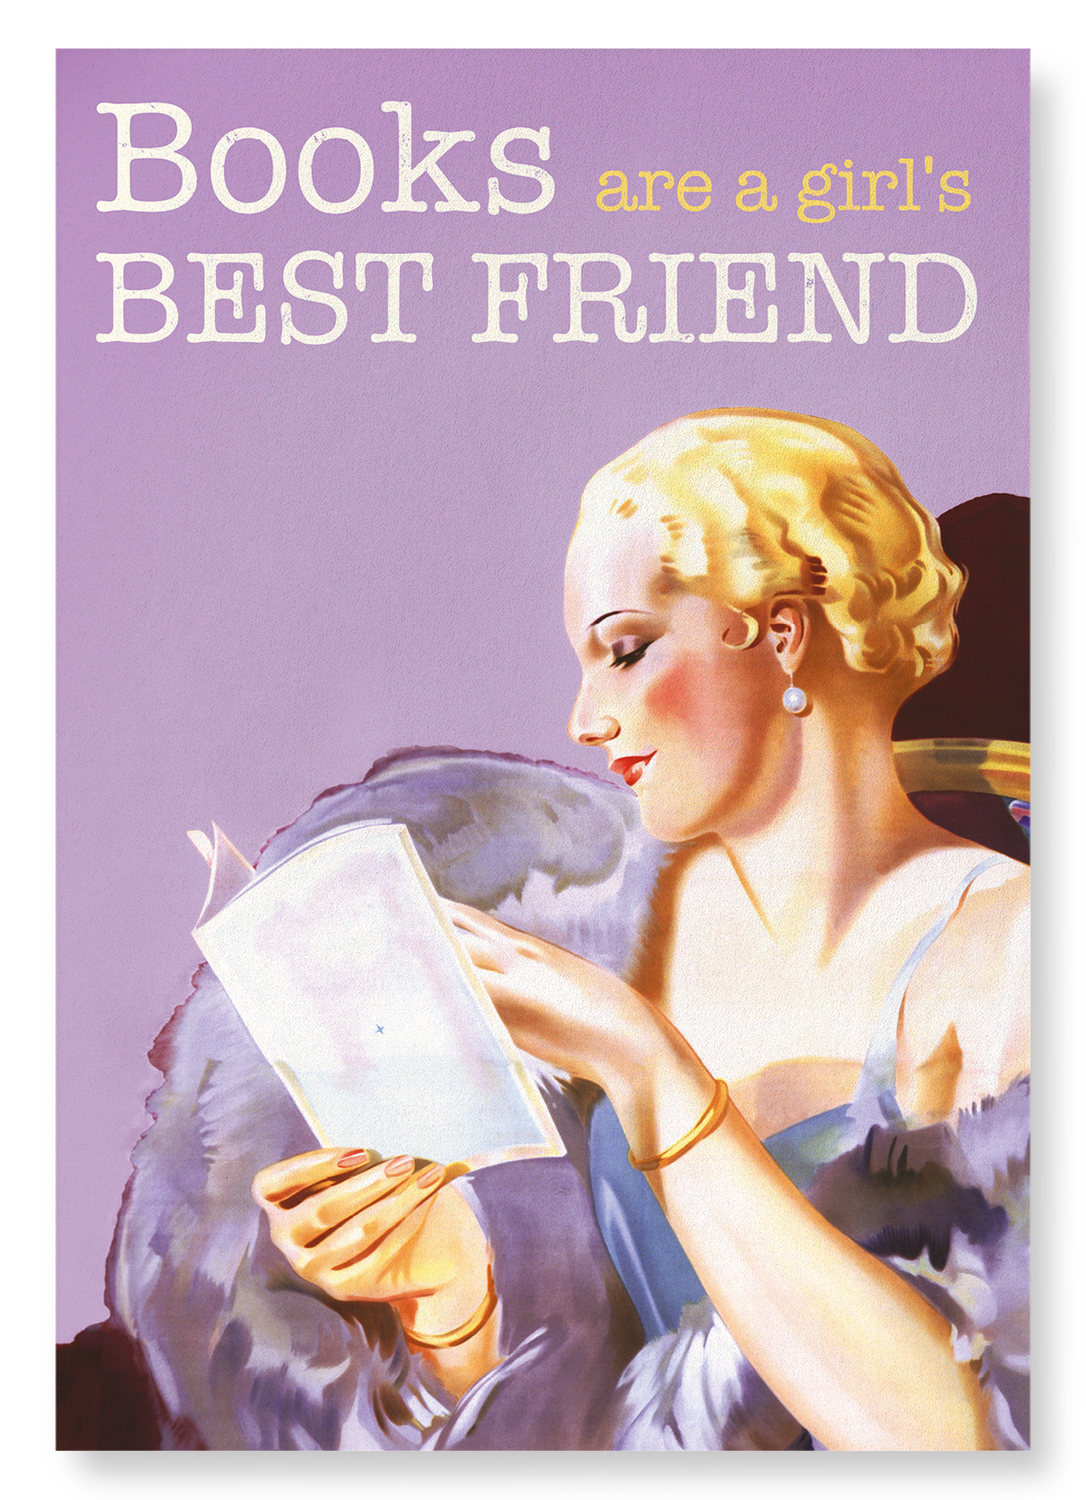 BOOKS ARE A GIRL’S BEST FRIEND: Vintage Art Print